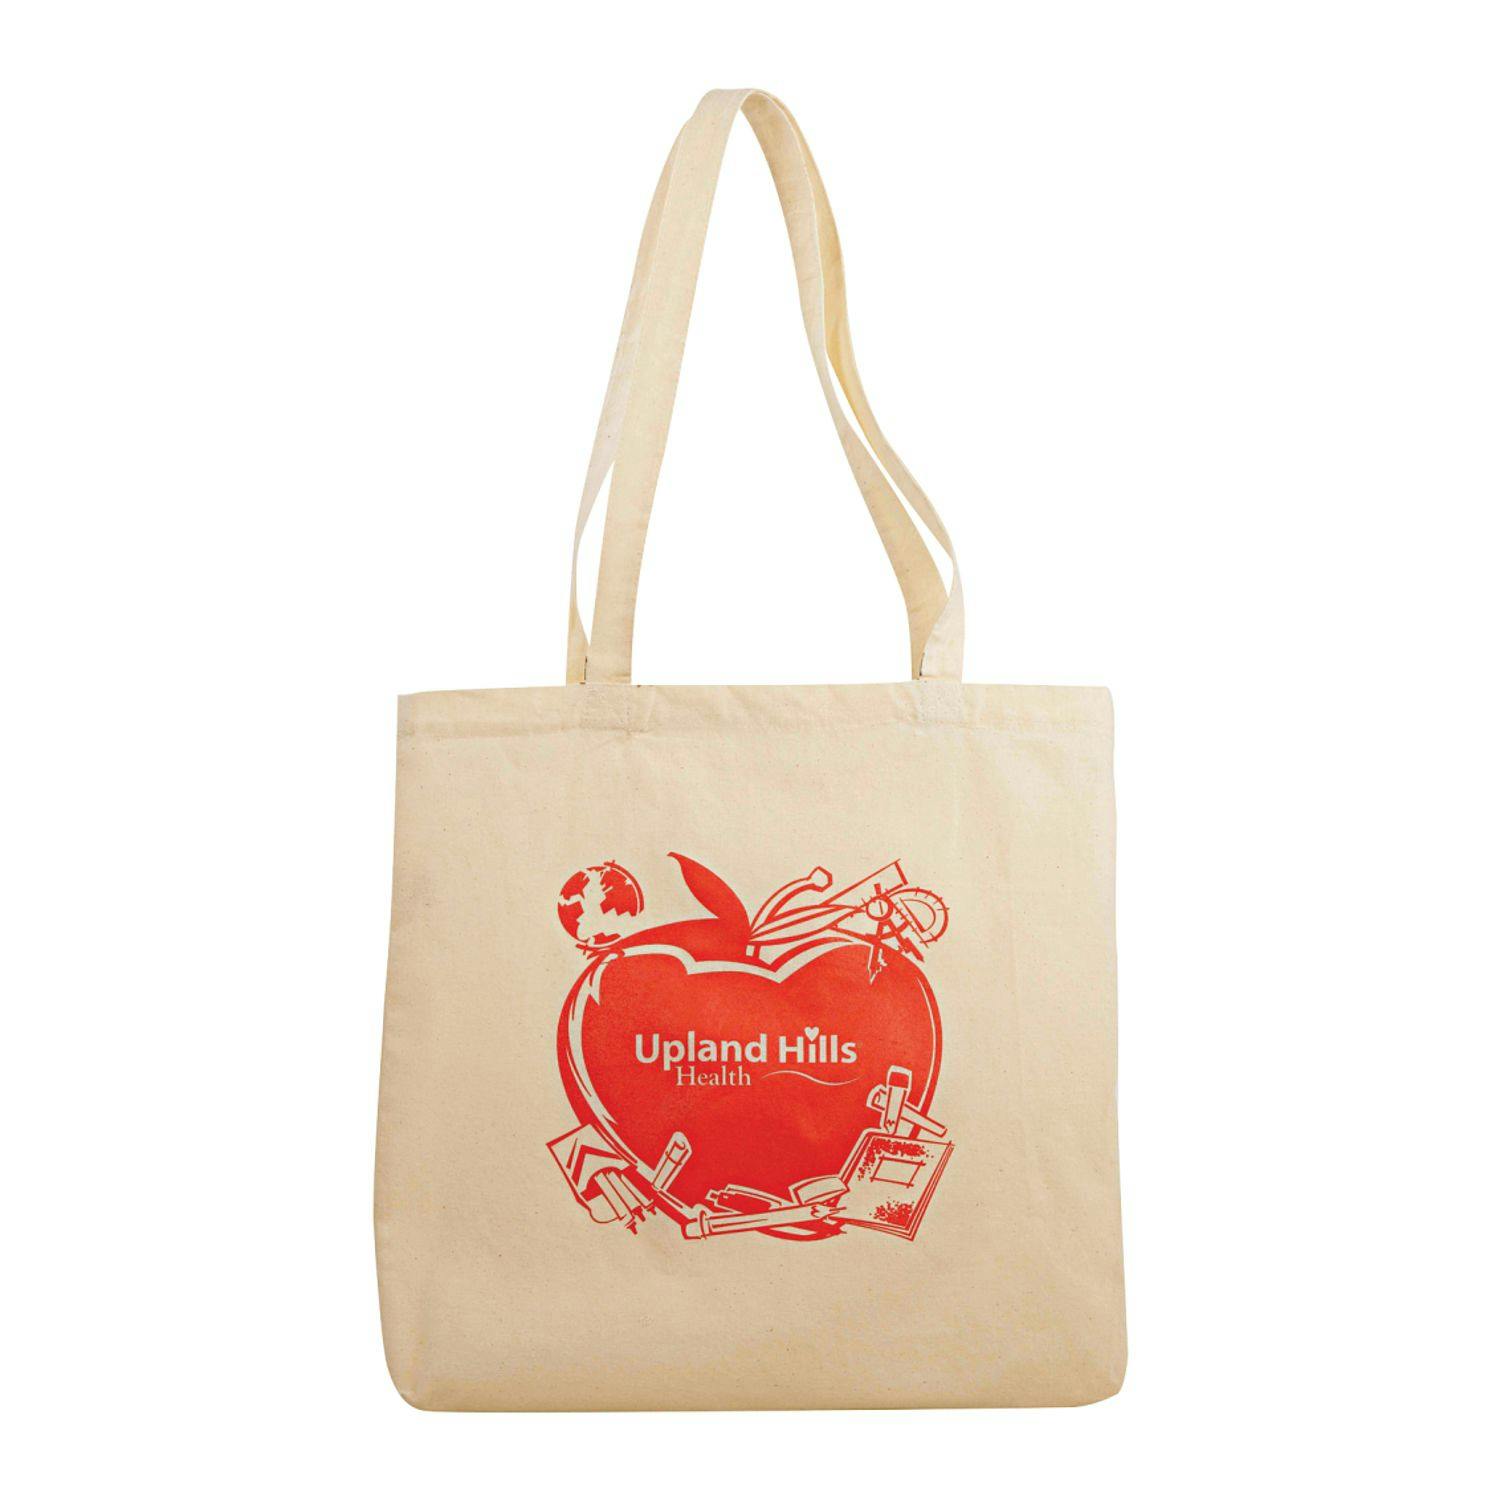 6oz Classic Cotton Canvas Meeting Tote - additional Image 1